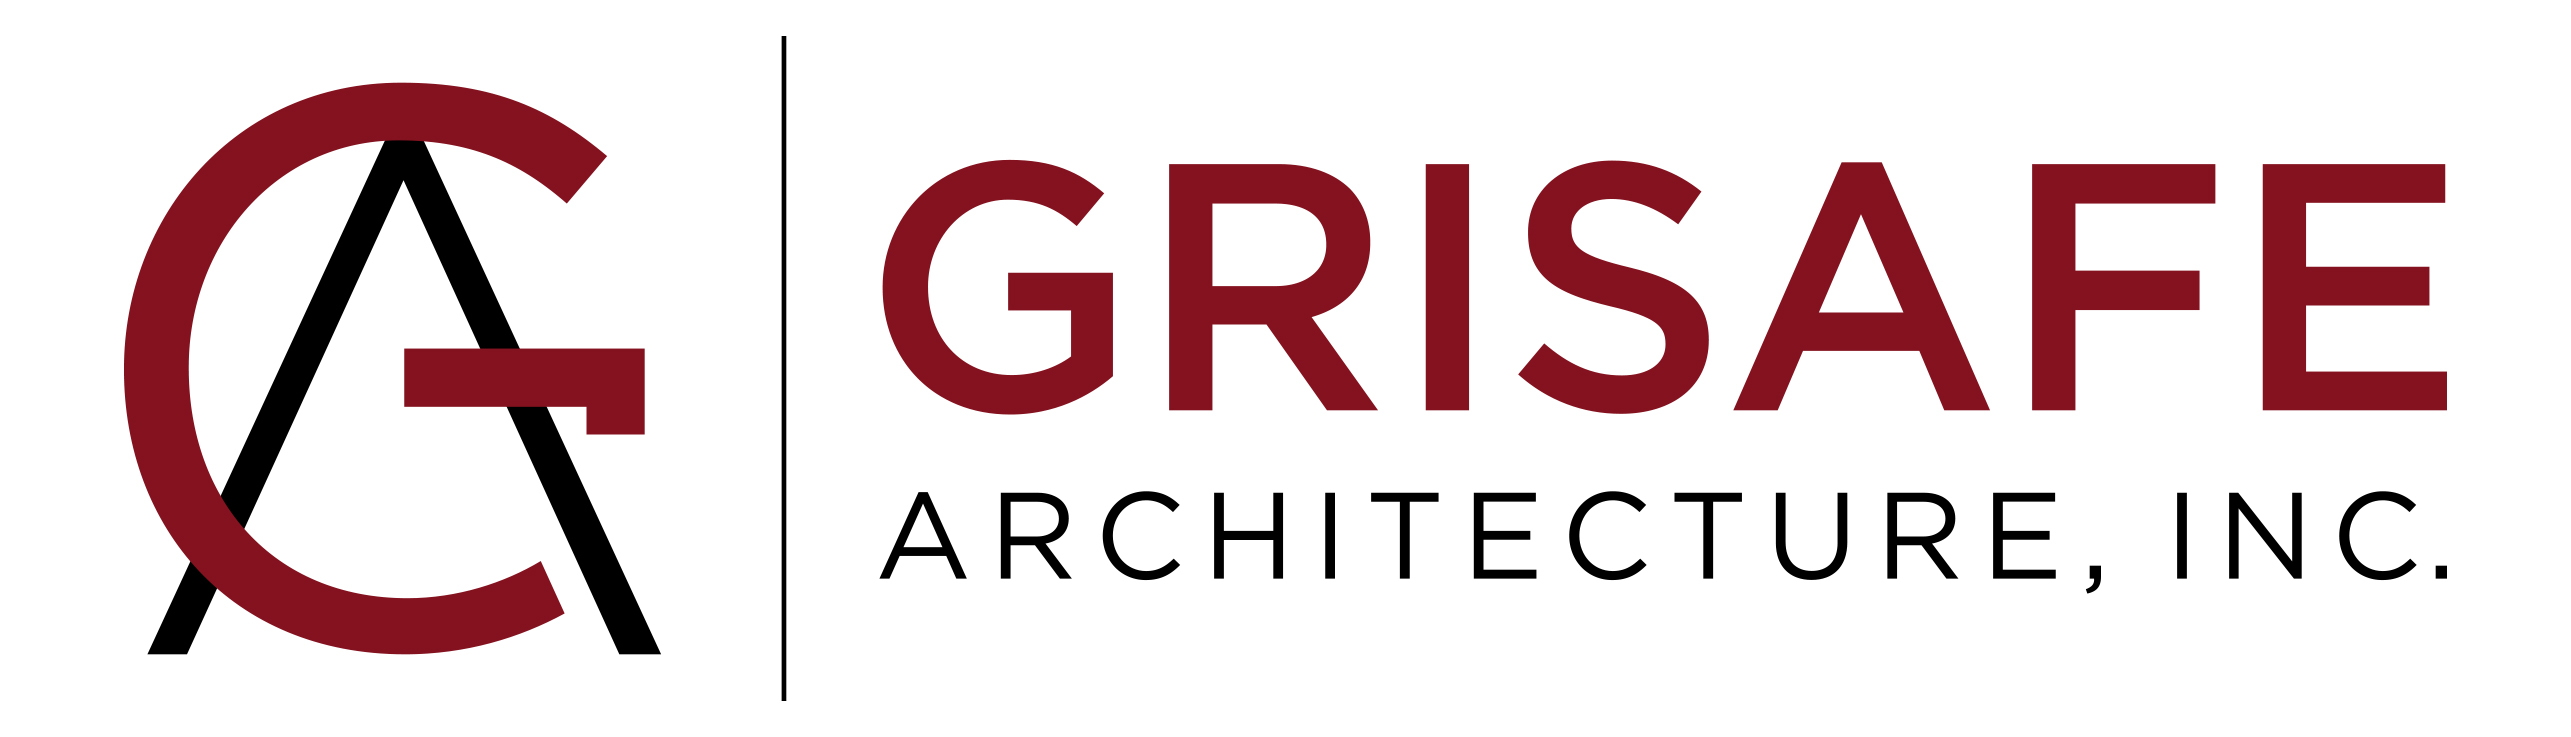 Grisafe Architecture logo